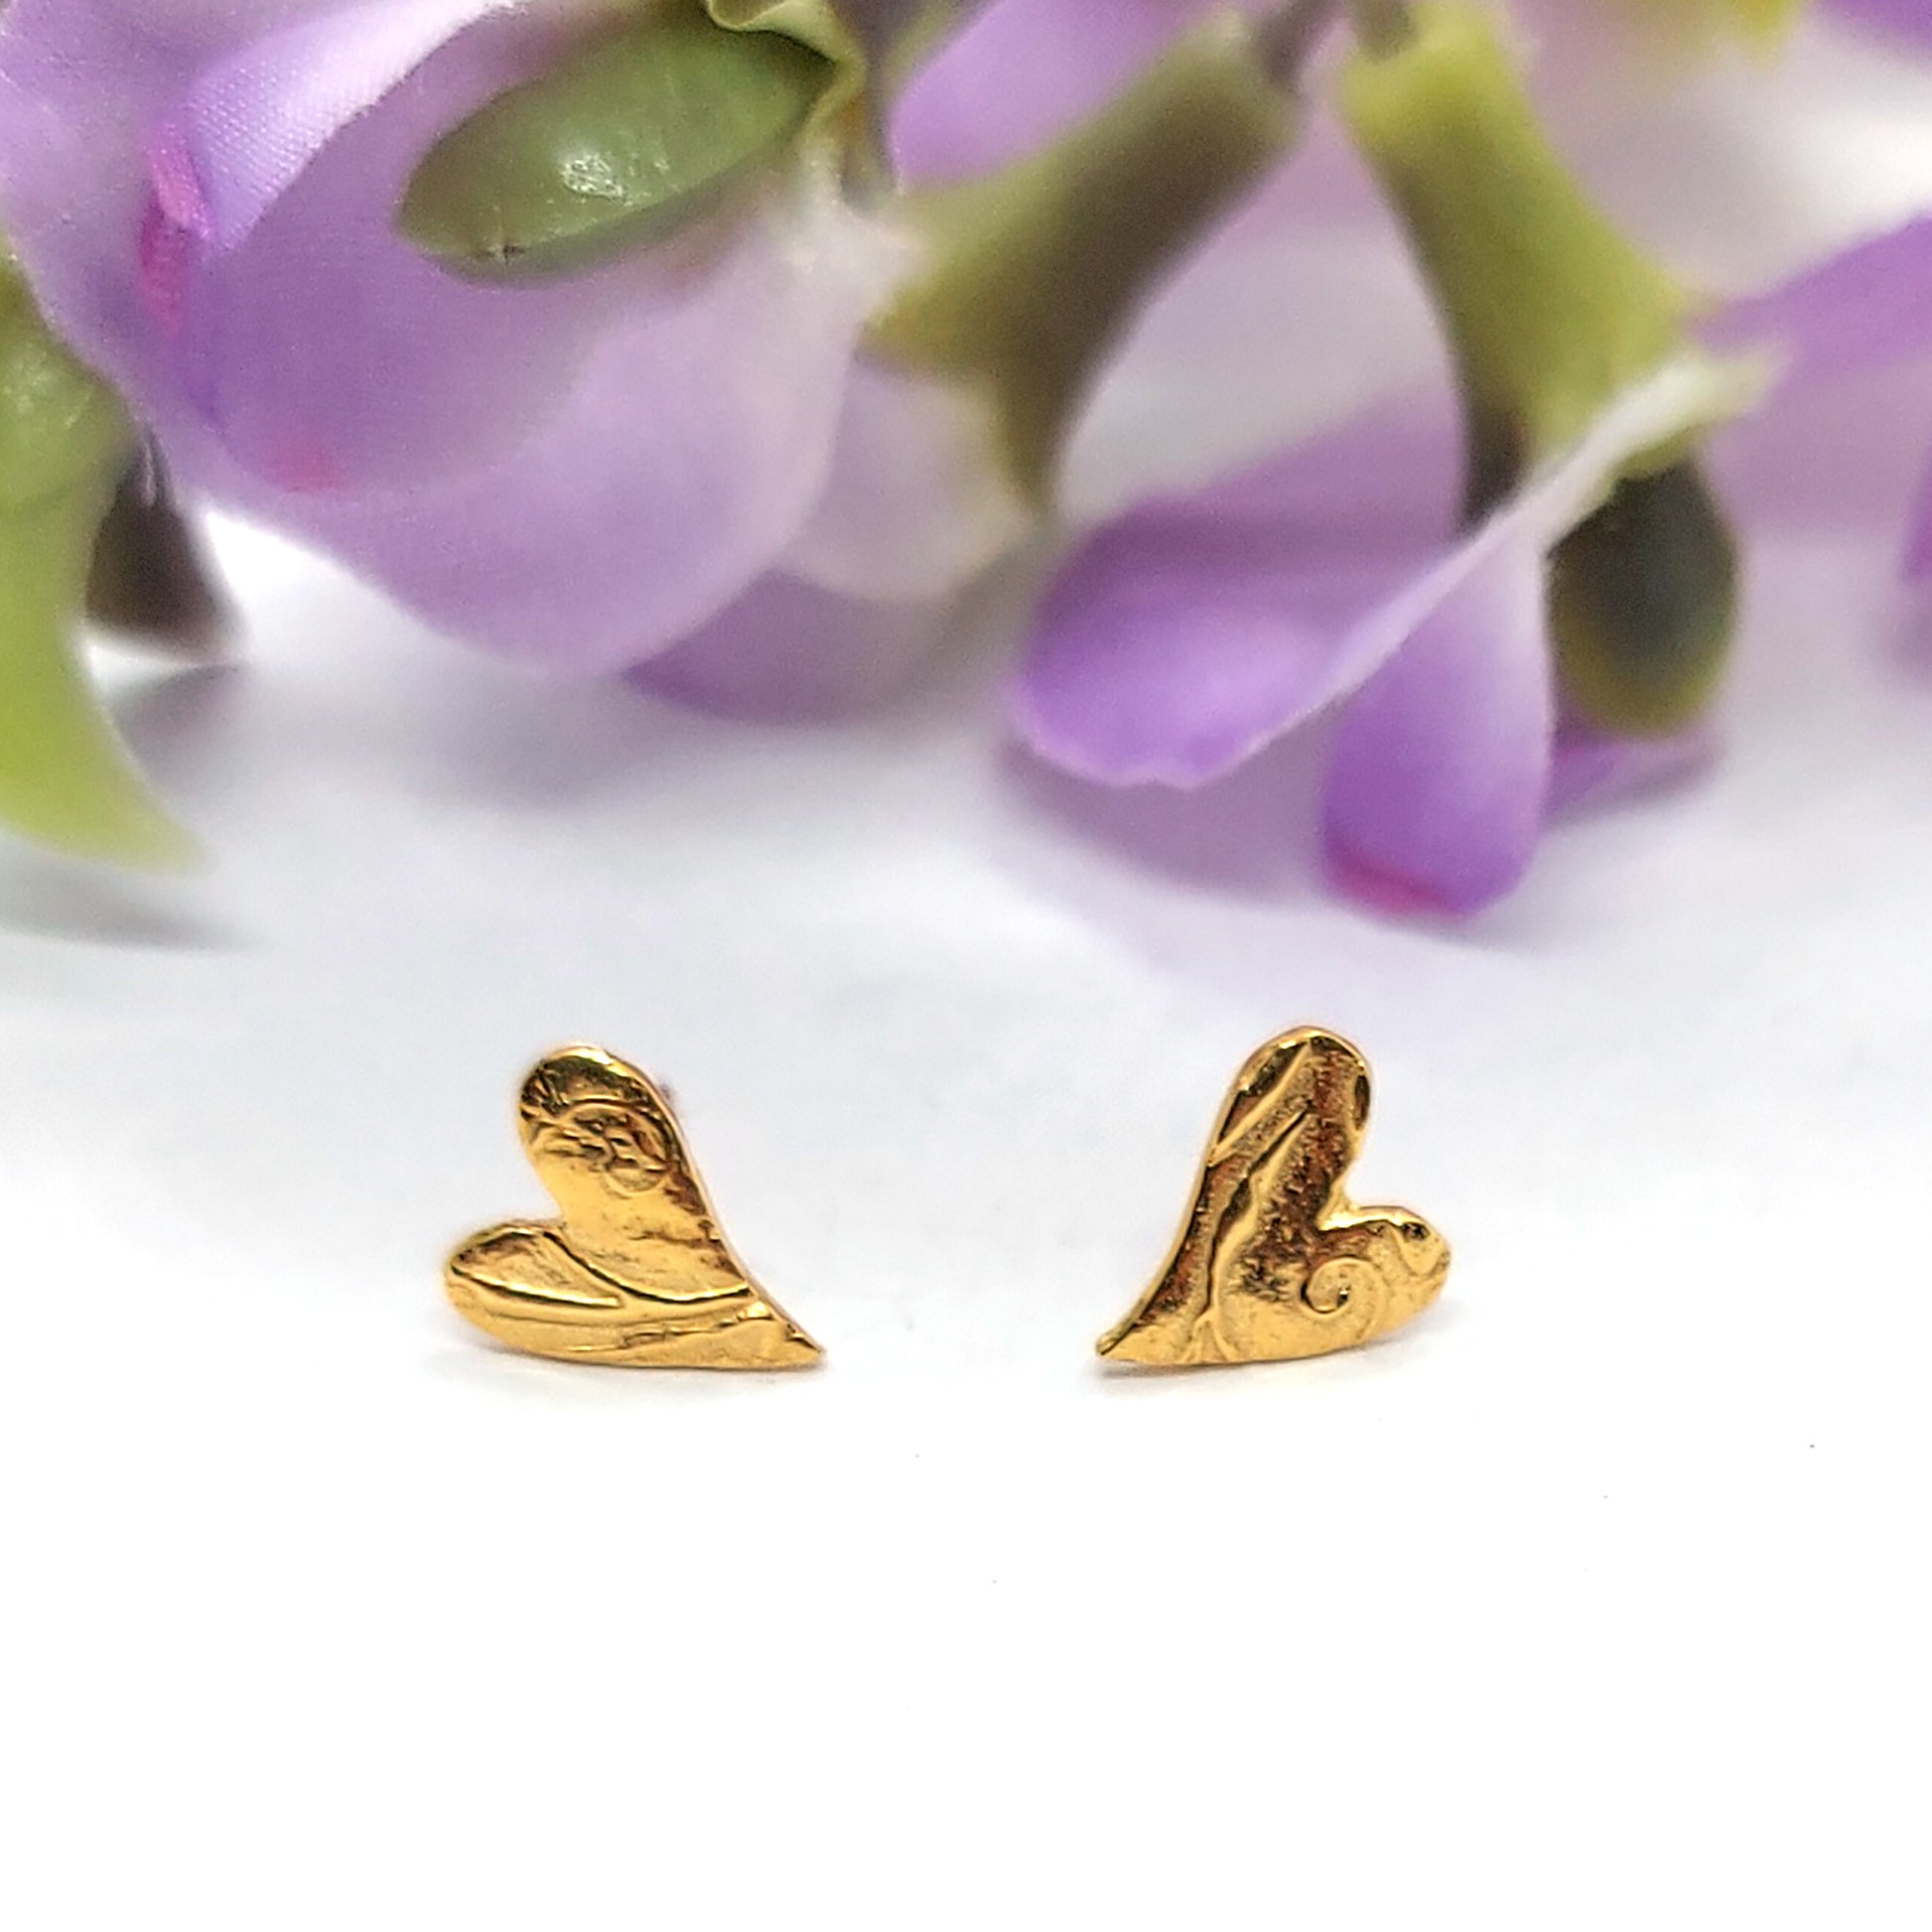 Yellow gold vermeil asymmetrical heart stud earrings with a swirl pattern. Pictured with flowers